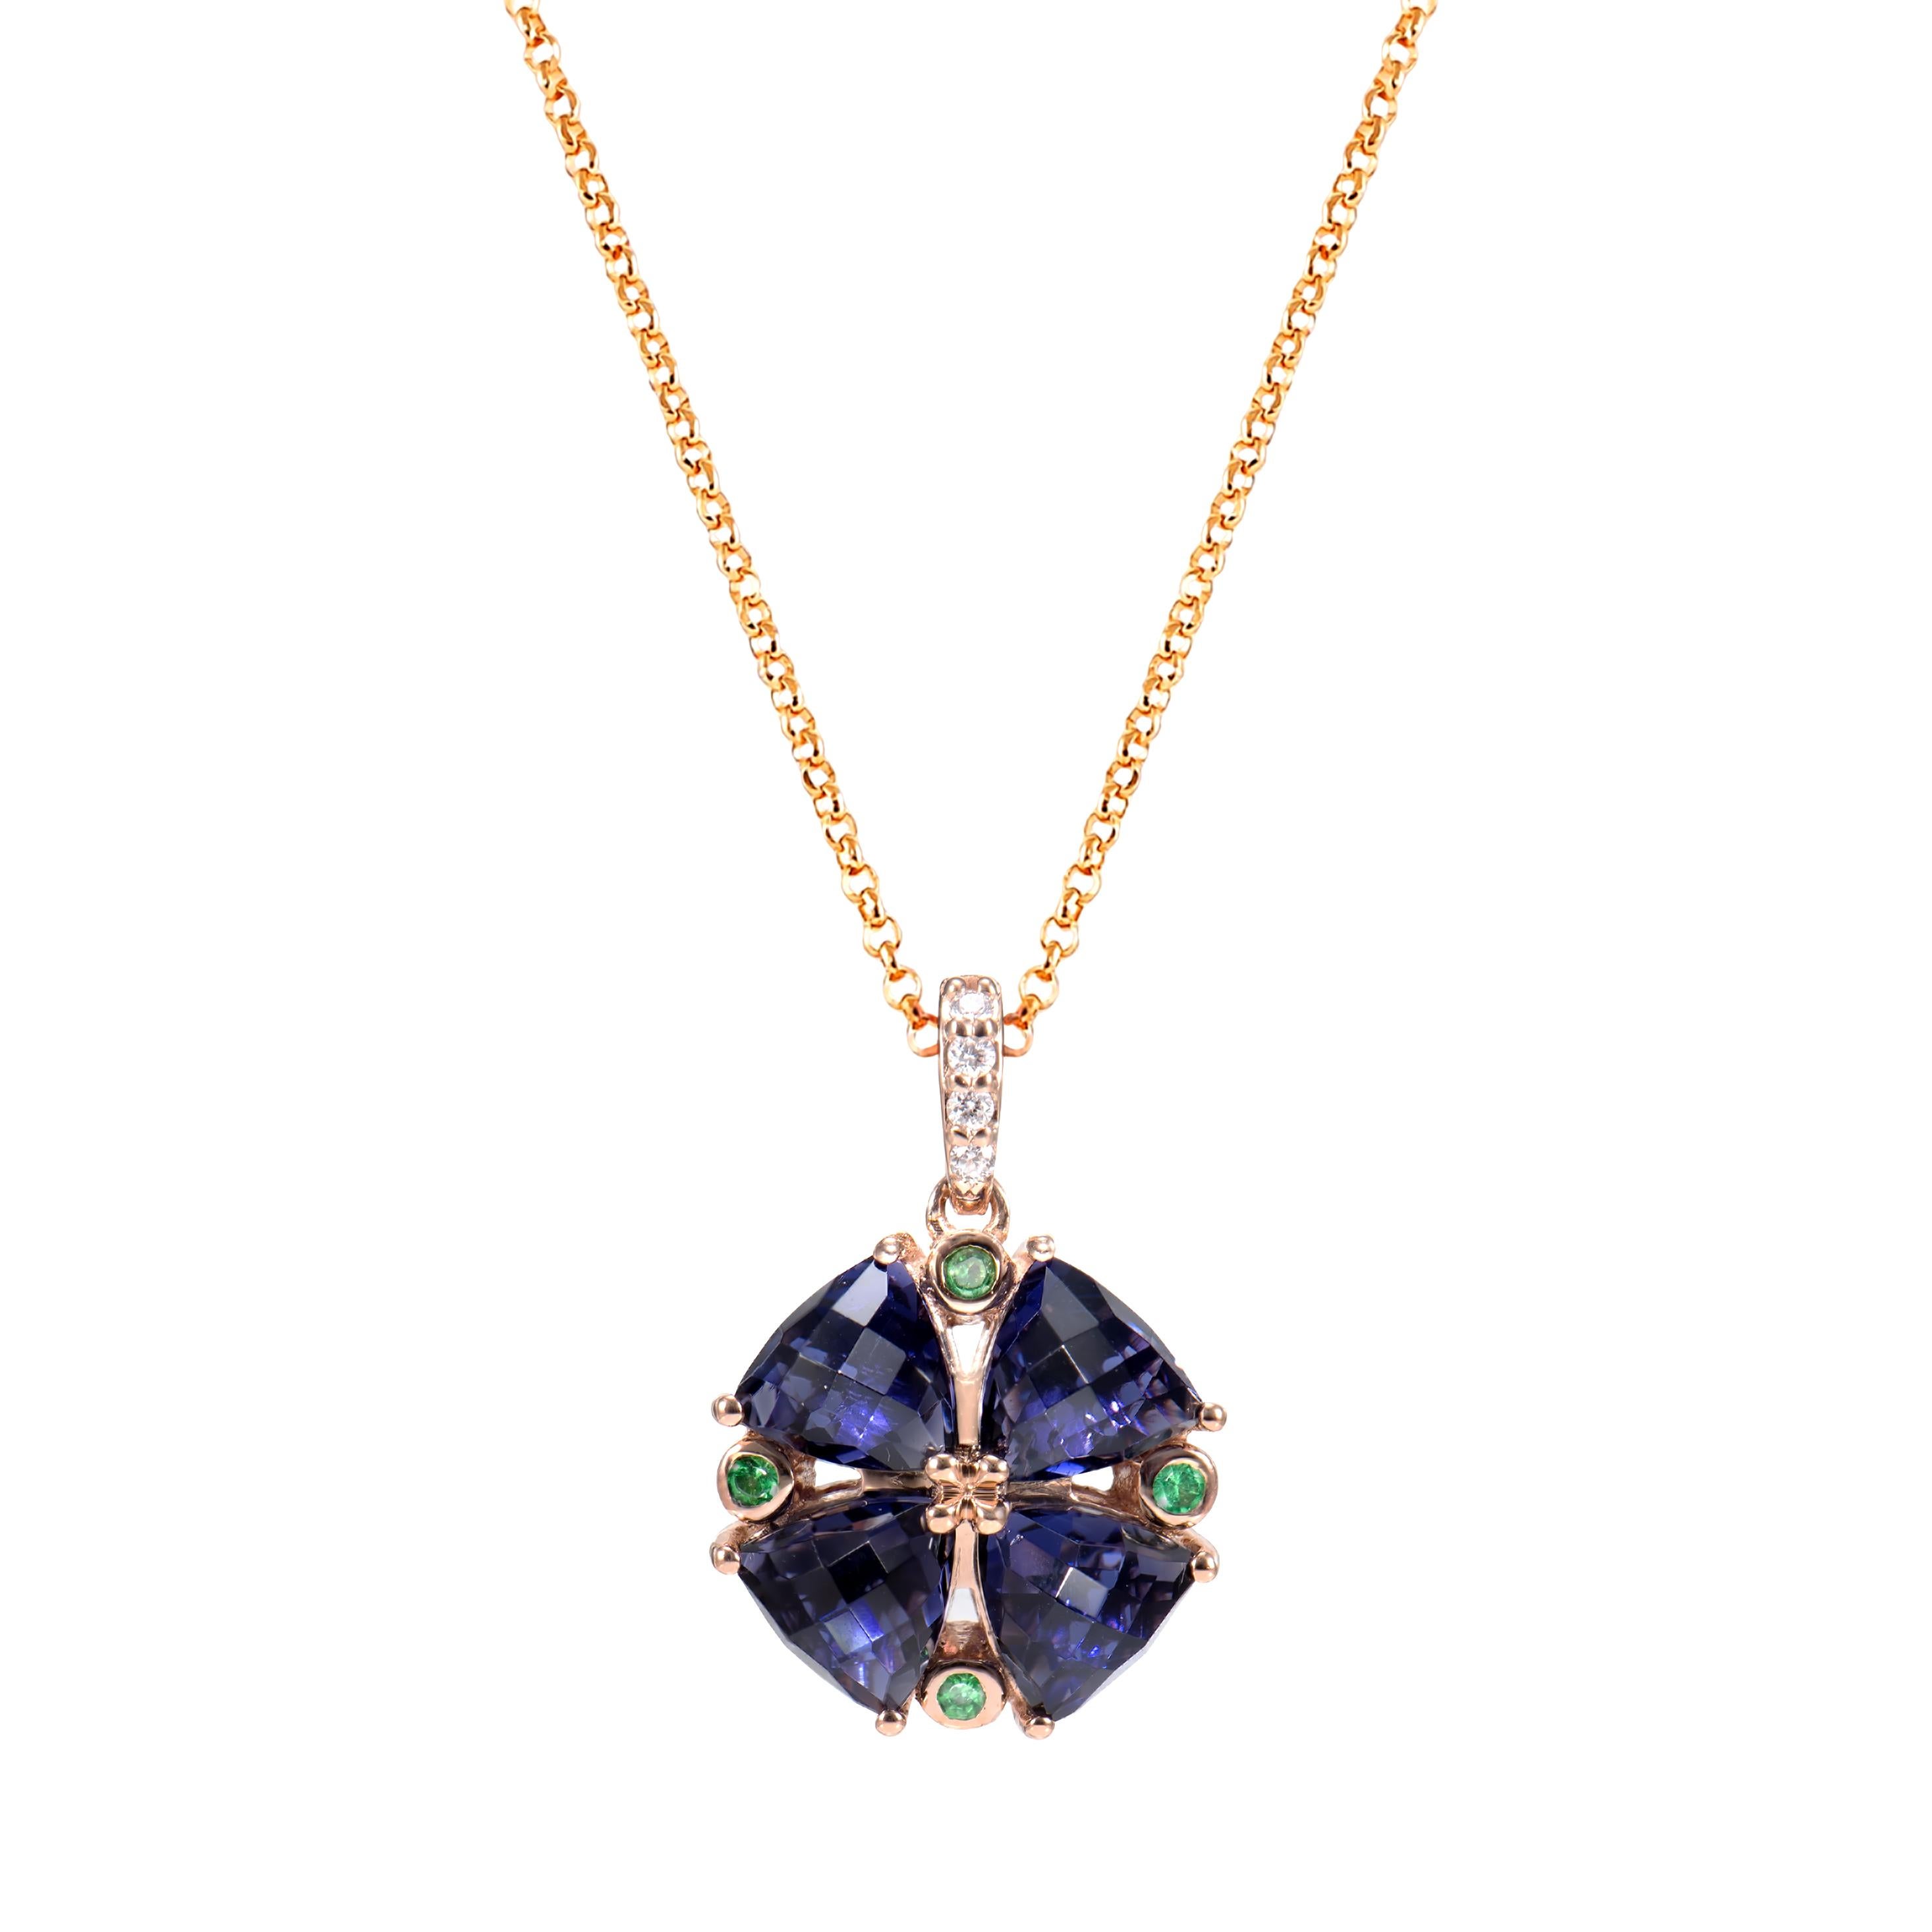 It's a fancy Iolite Pendant in a trillion shape with purple hue. The Pendant is elegant and can be worn for many occasions.

Iolite Pendant in 18Karat Rose Gold with Tsavorite and White Diamond.

Iolite: 3.07 carat, 5.50mm size, Trillion C/B